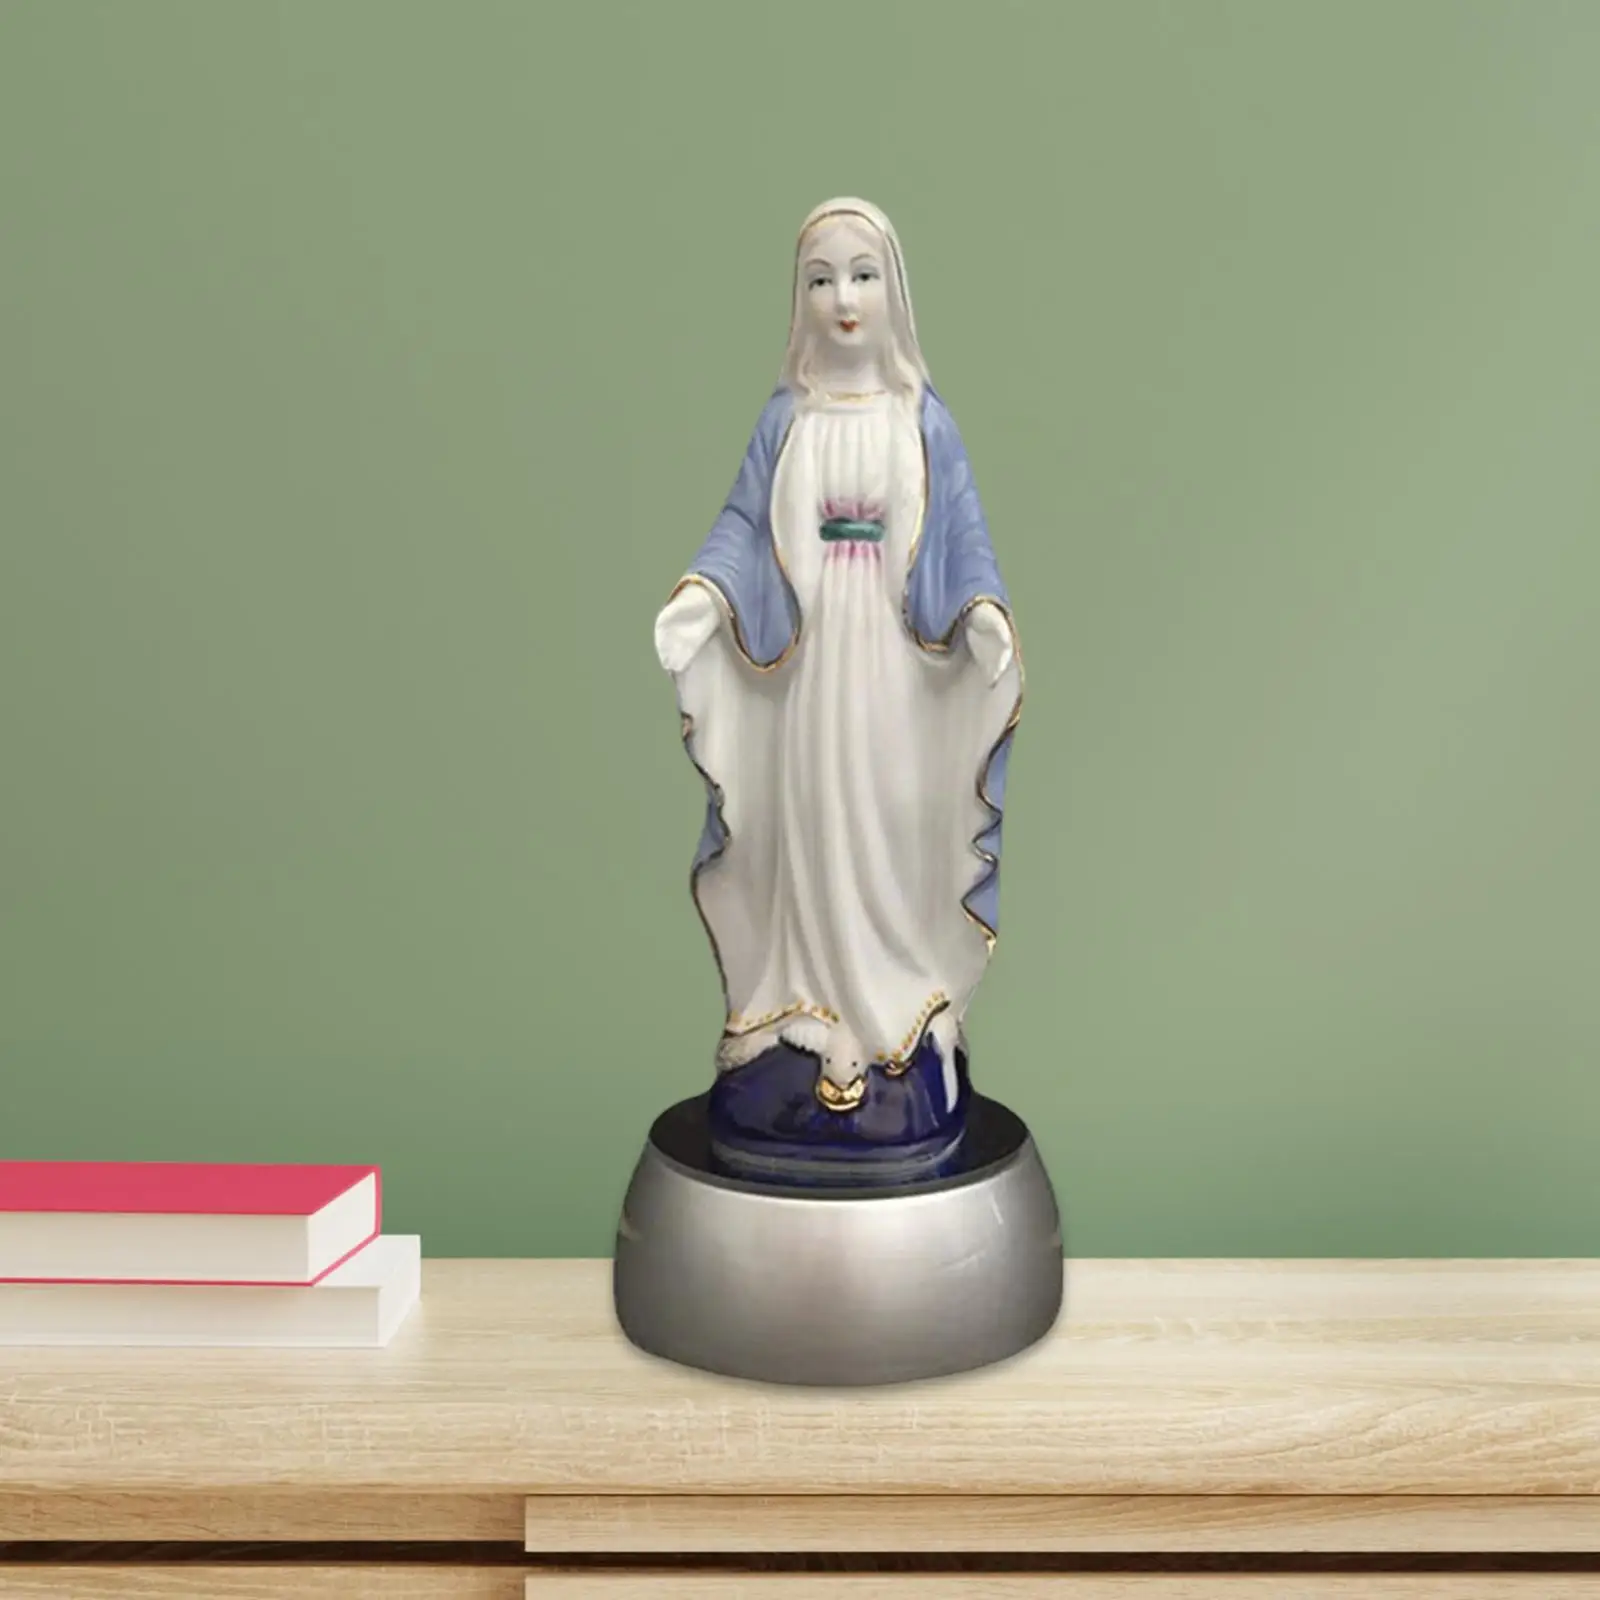 Bedside Table Lamp Ceramic Virgin Mary Statue Our Lady of Grace LED Nightlight for Bookcase College Office Living Room Bedroom